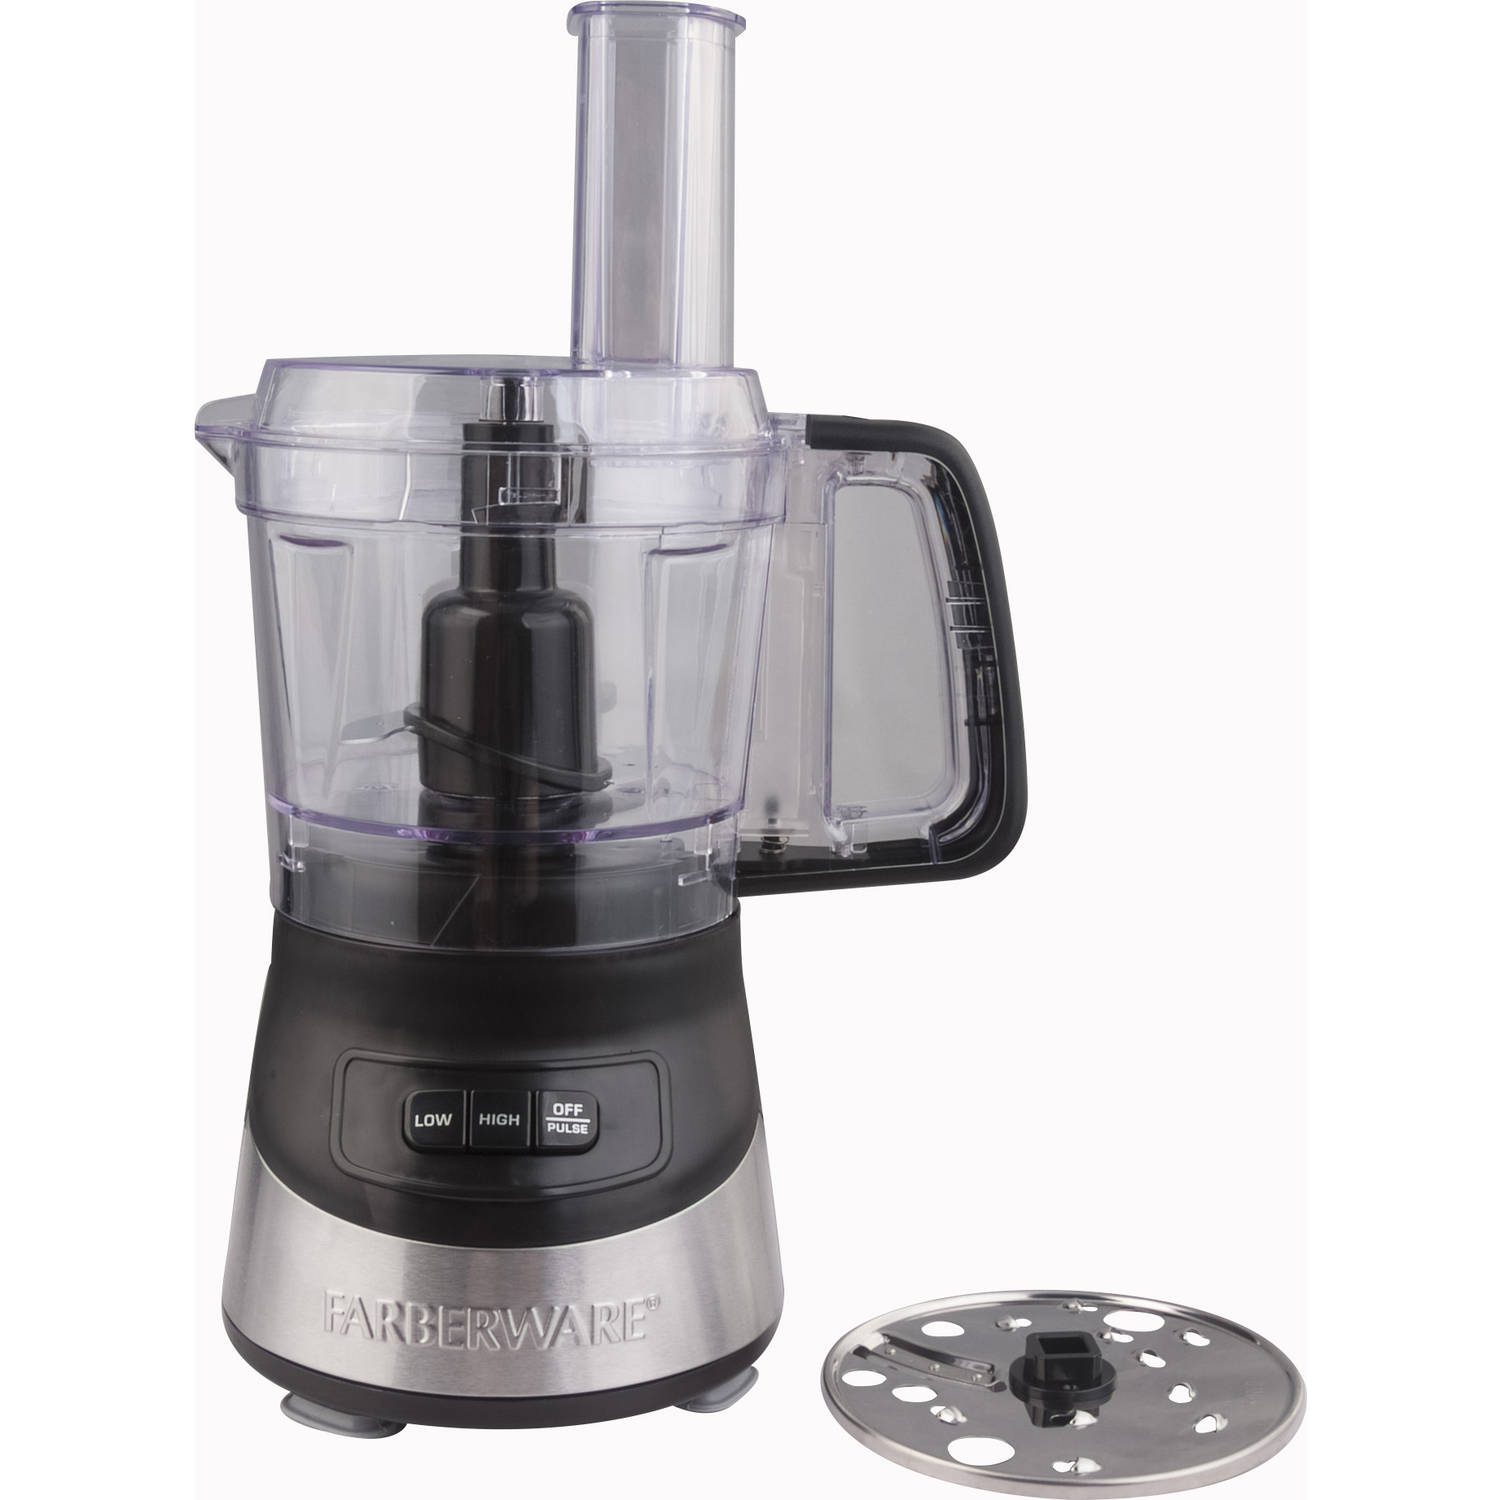 Farberware 4 Cup Food Processor with Stainless Steel Blade - image 1 of 5